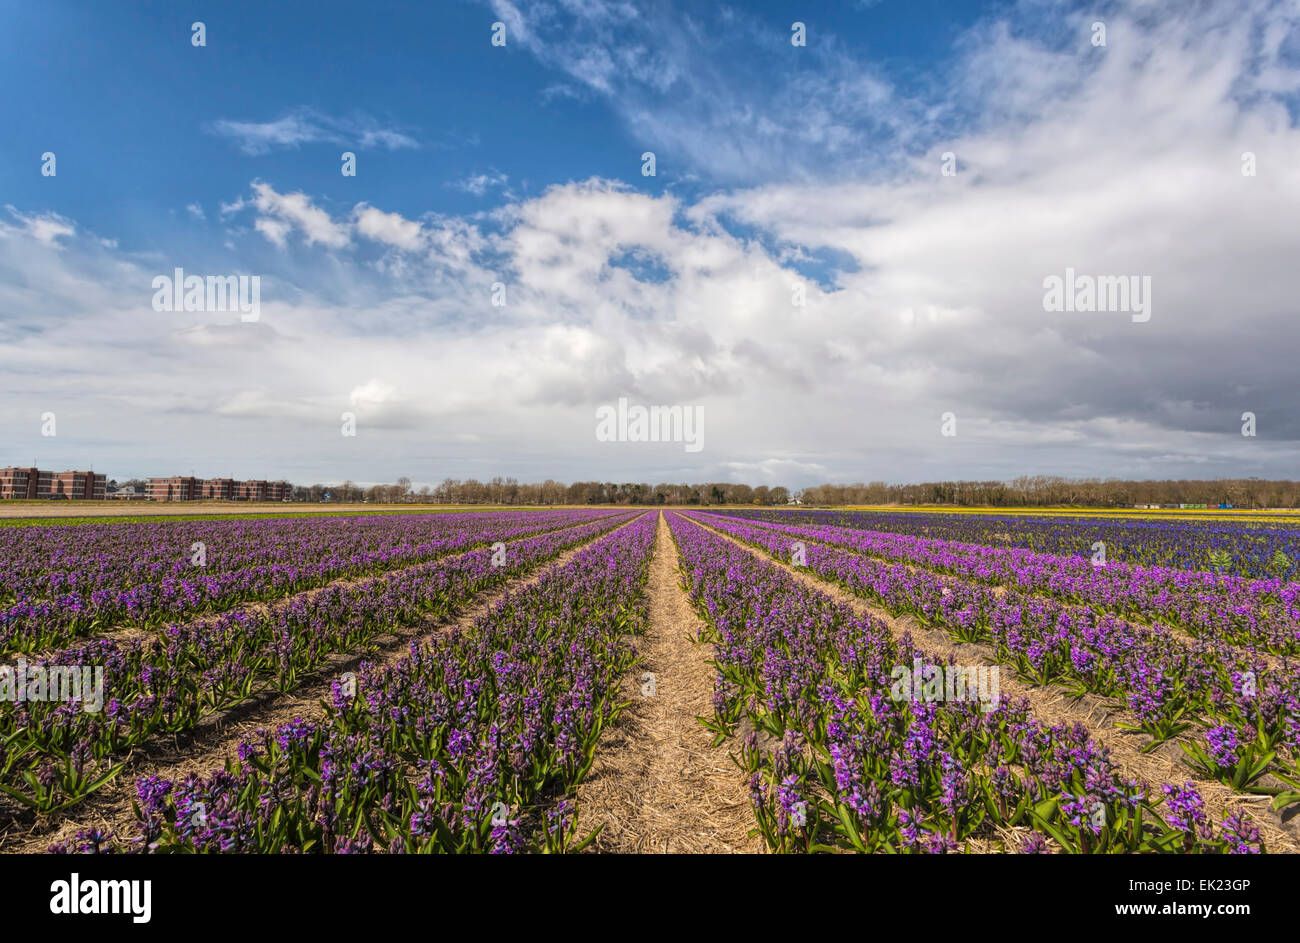 Bulb fields in spring: Wide angle view of purple hyacinths( Asparagaceae ), Voorhout, South Holland, The Netherlands. Stock Photo